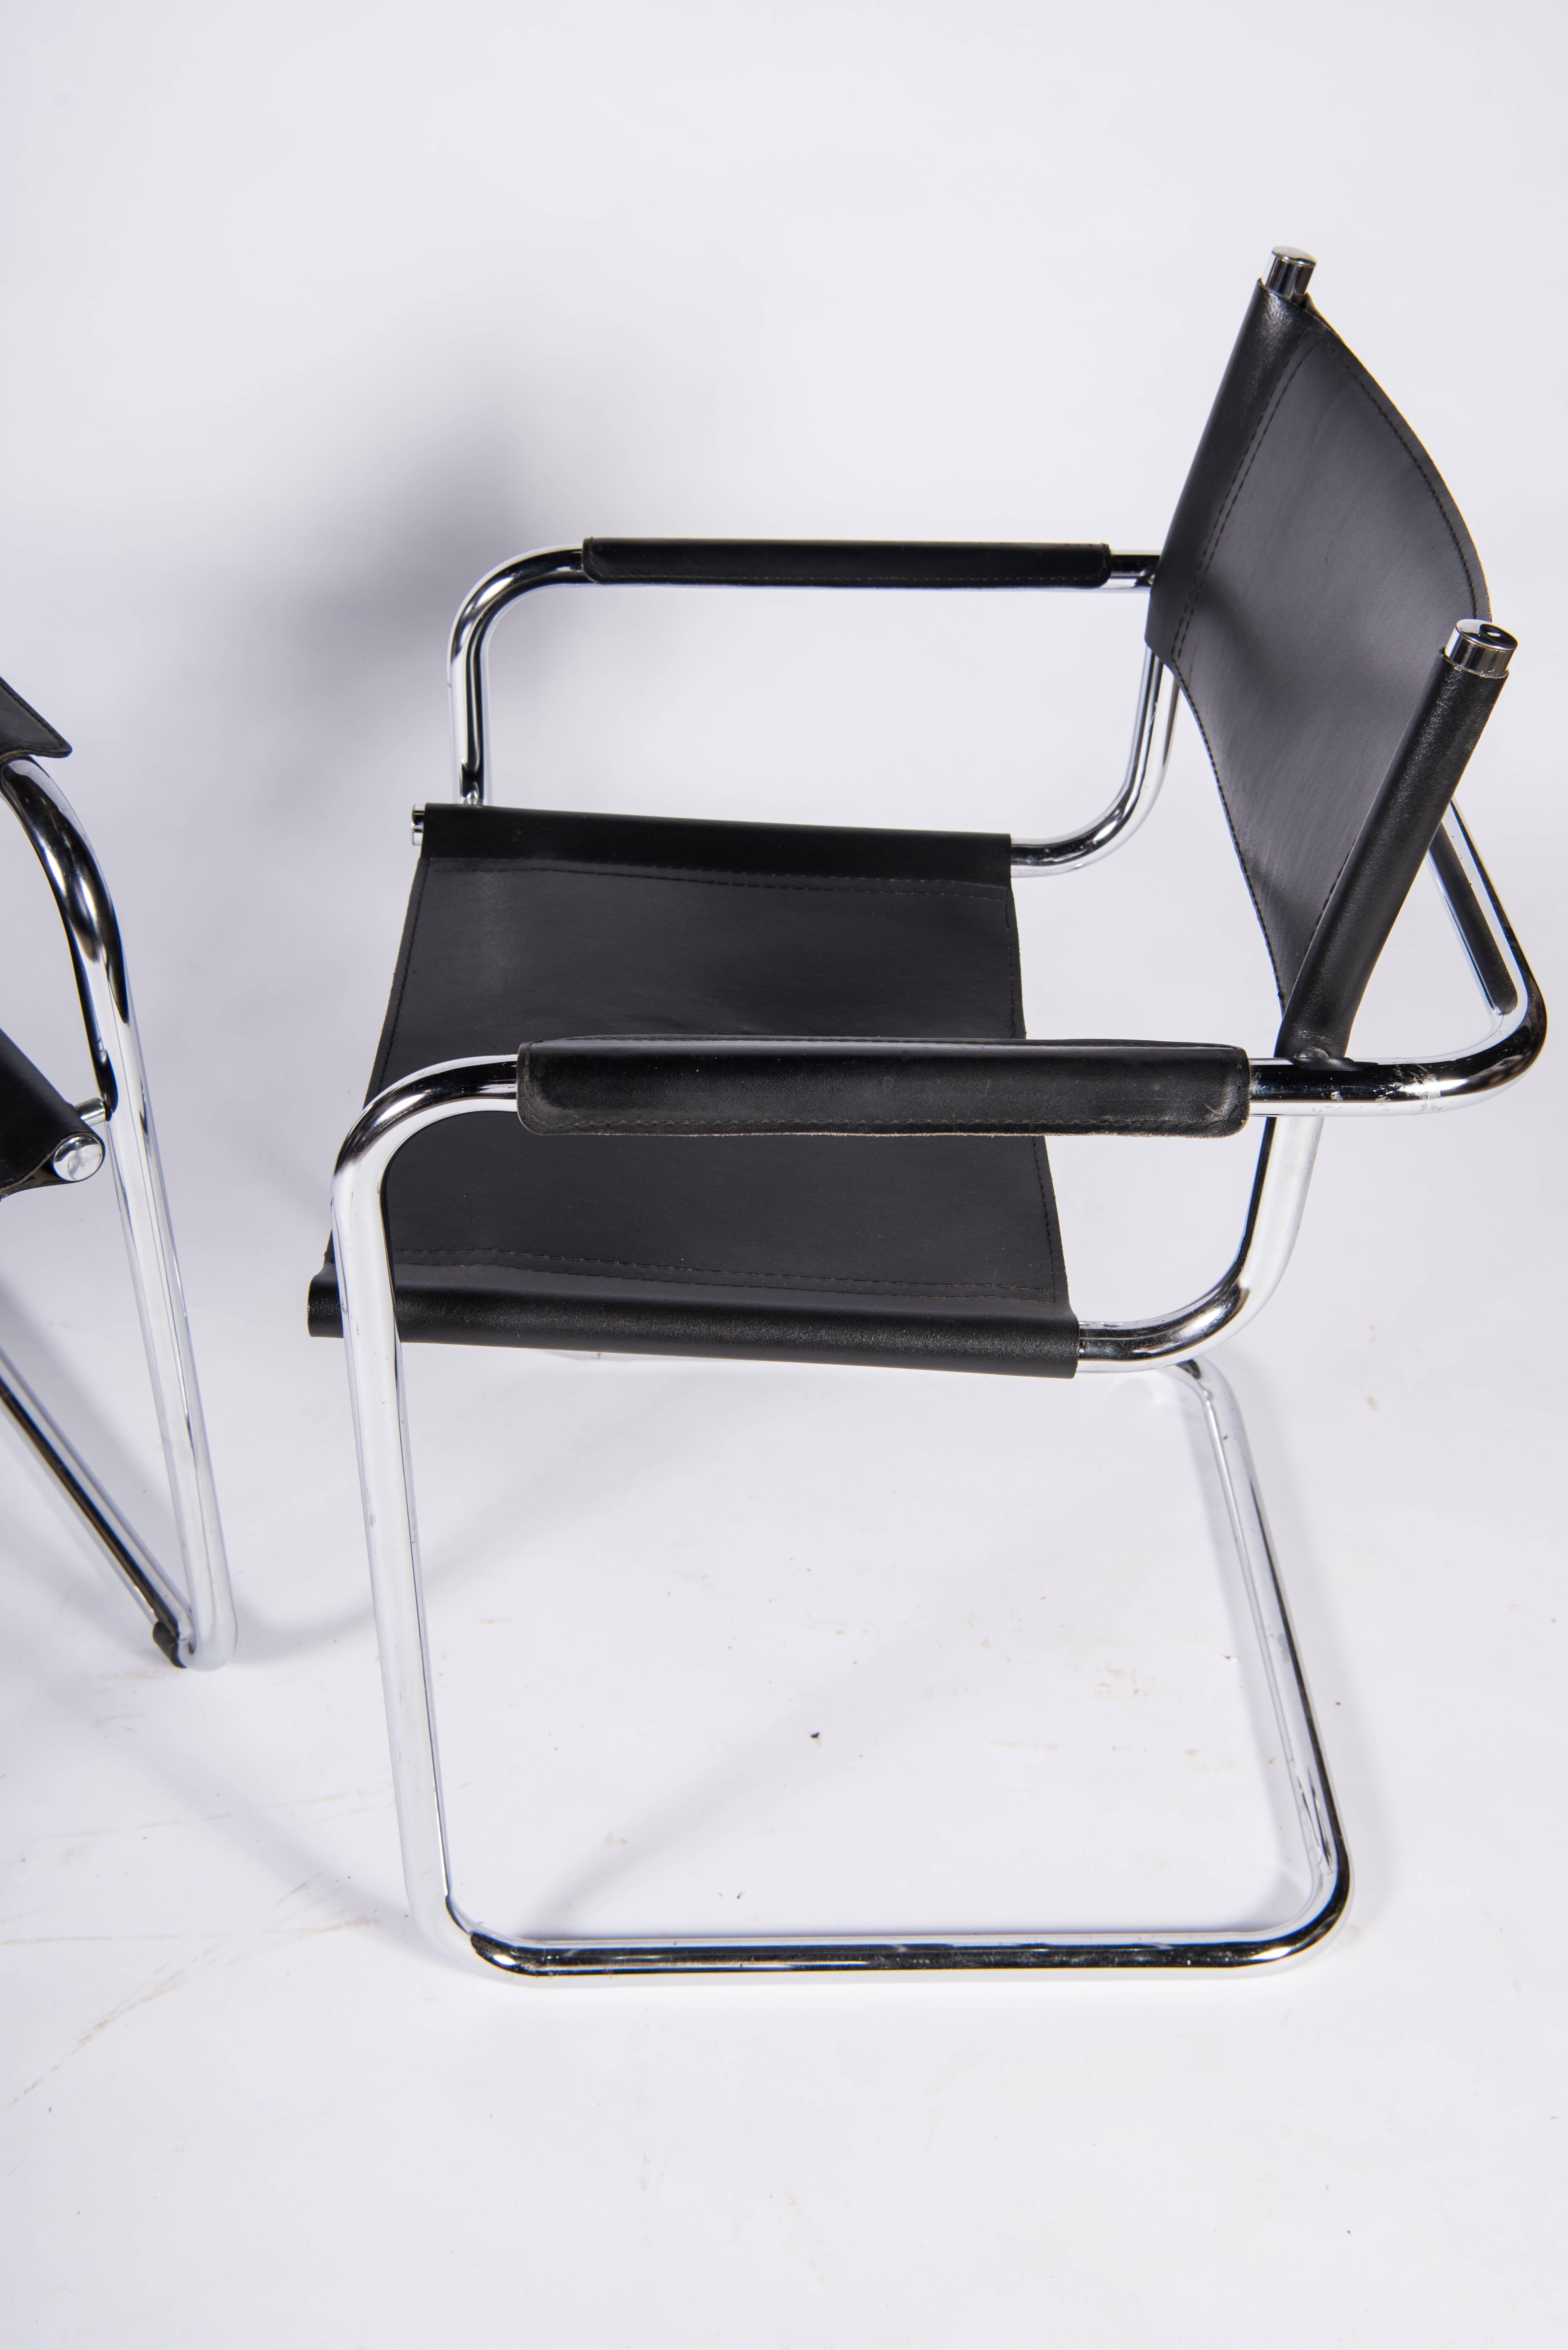 Bauhaus 1920 Cantilevered Chrome Armchairs with black leather sling seat 